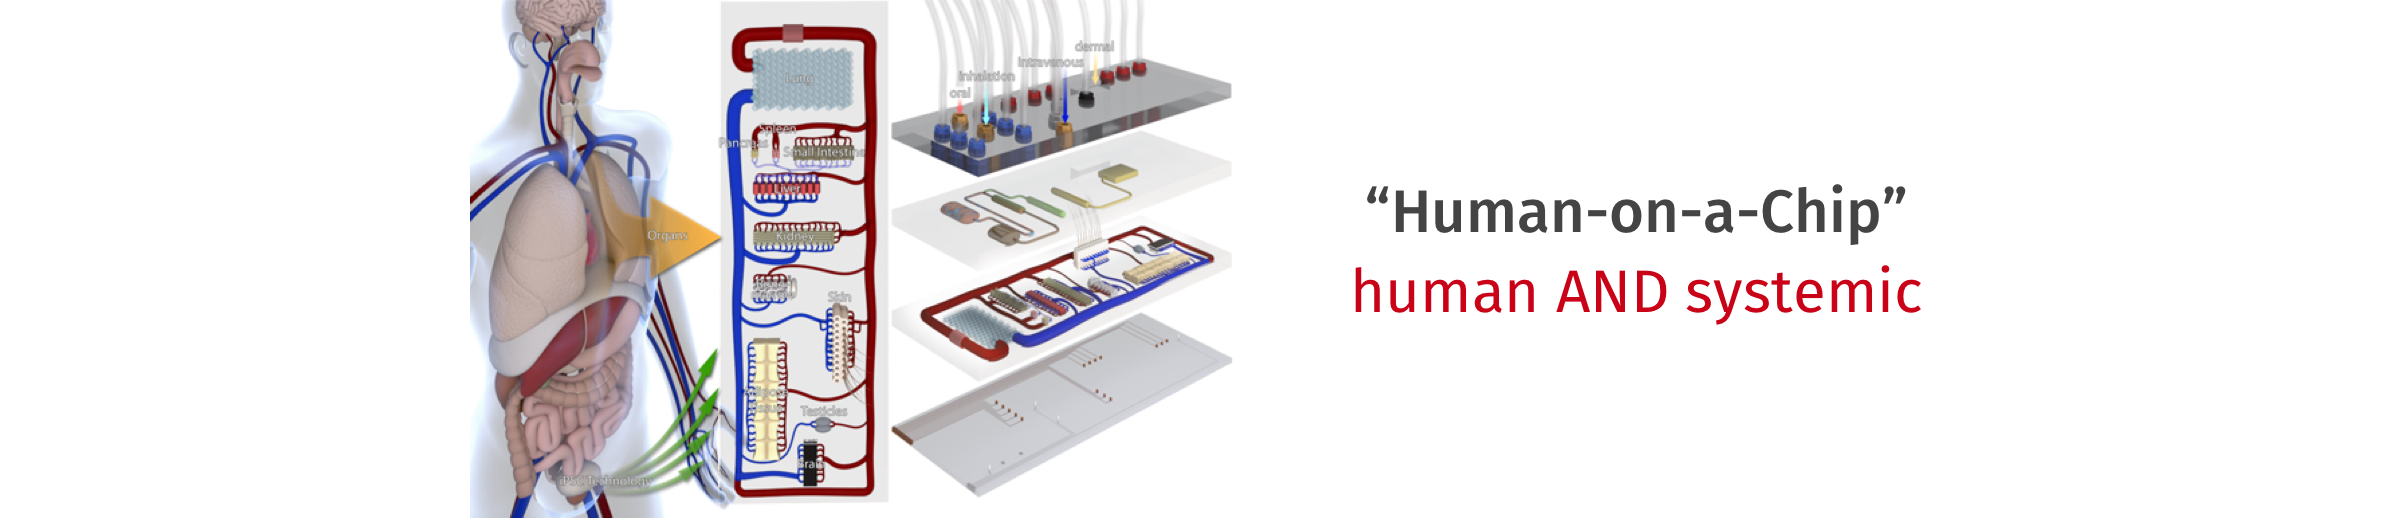 Human-on-a-Chip: The Solution